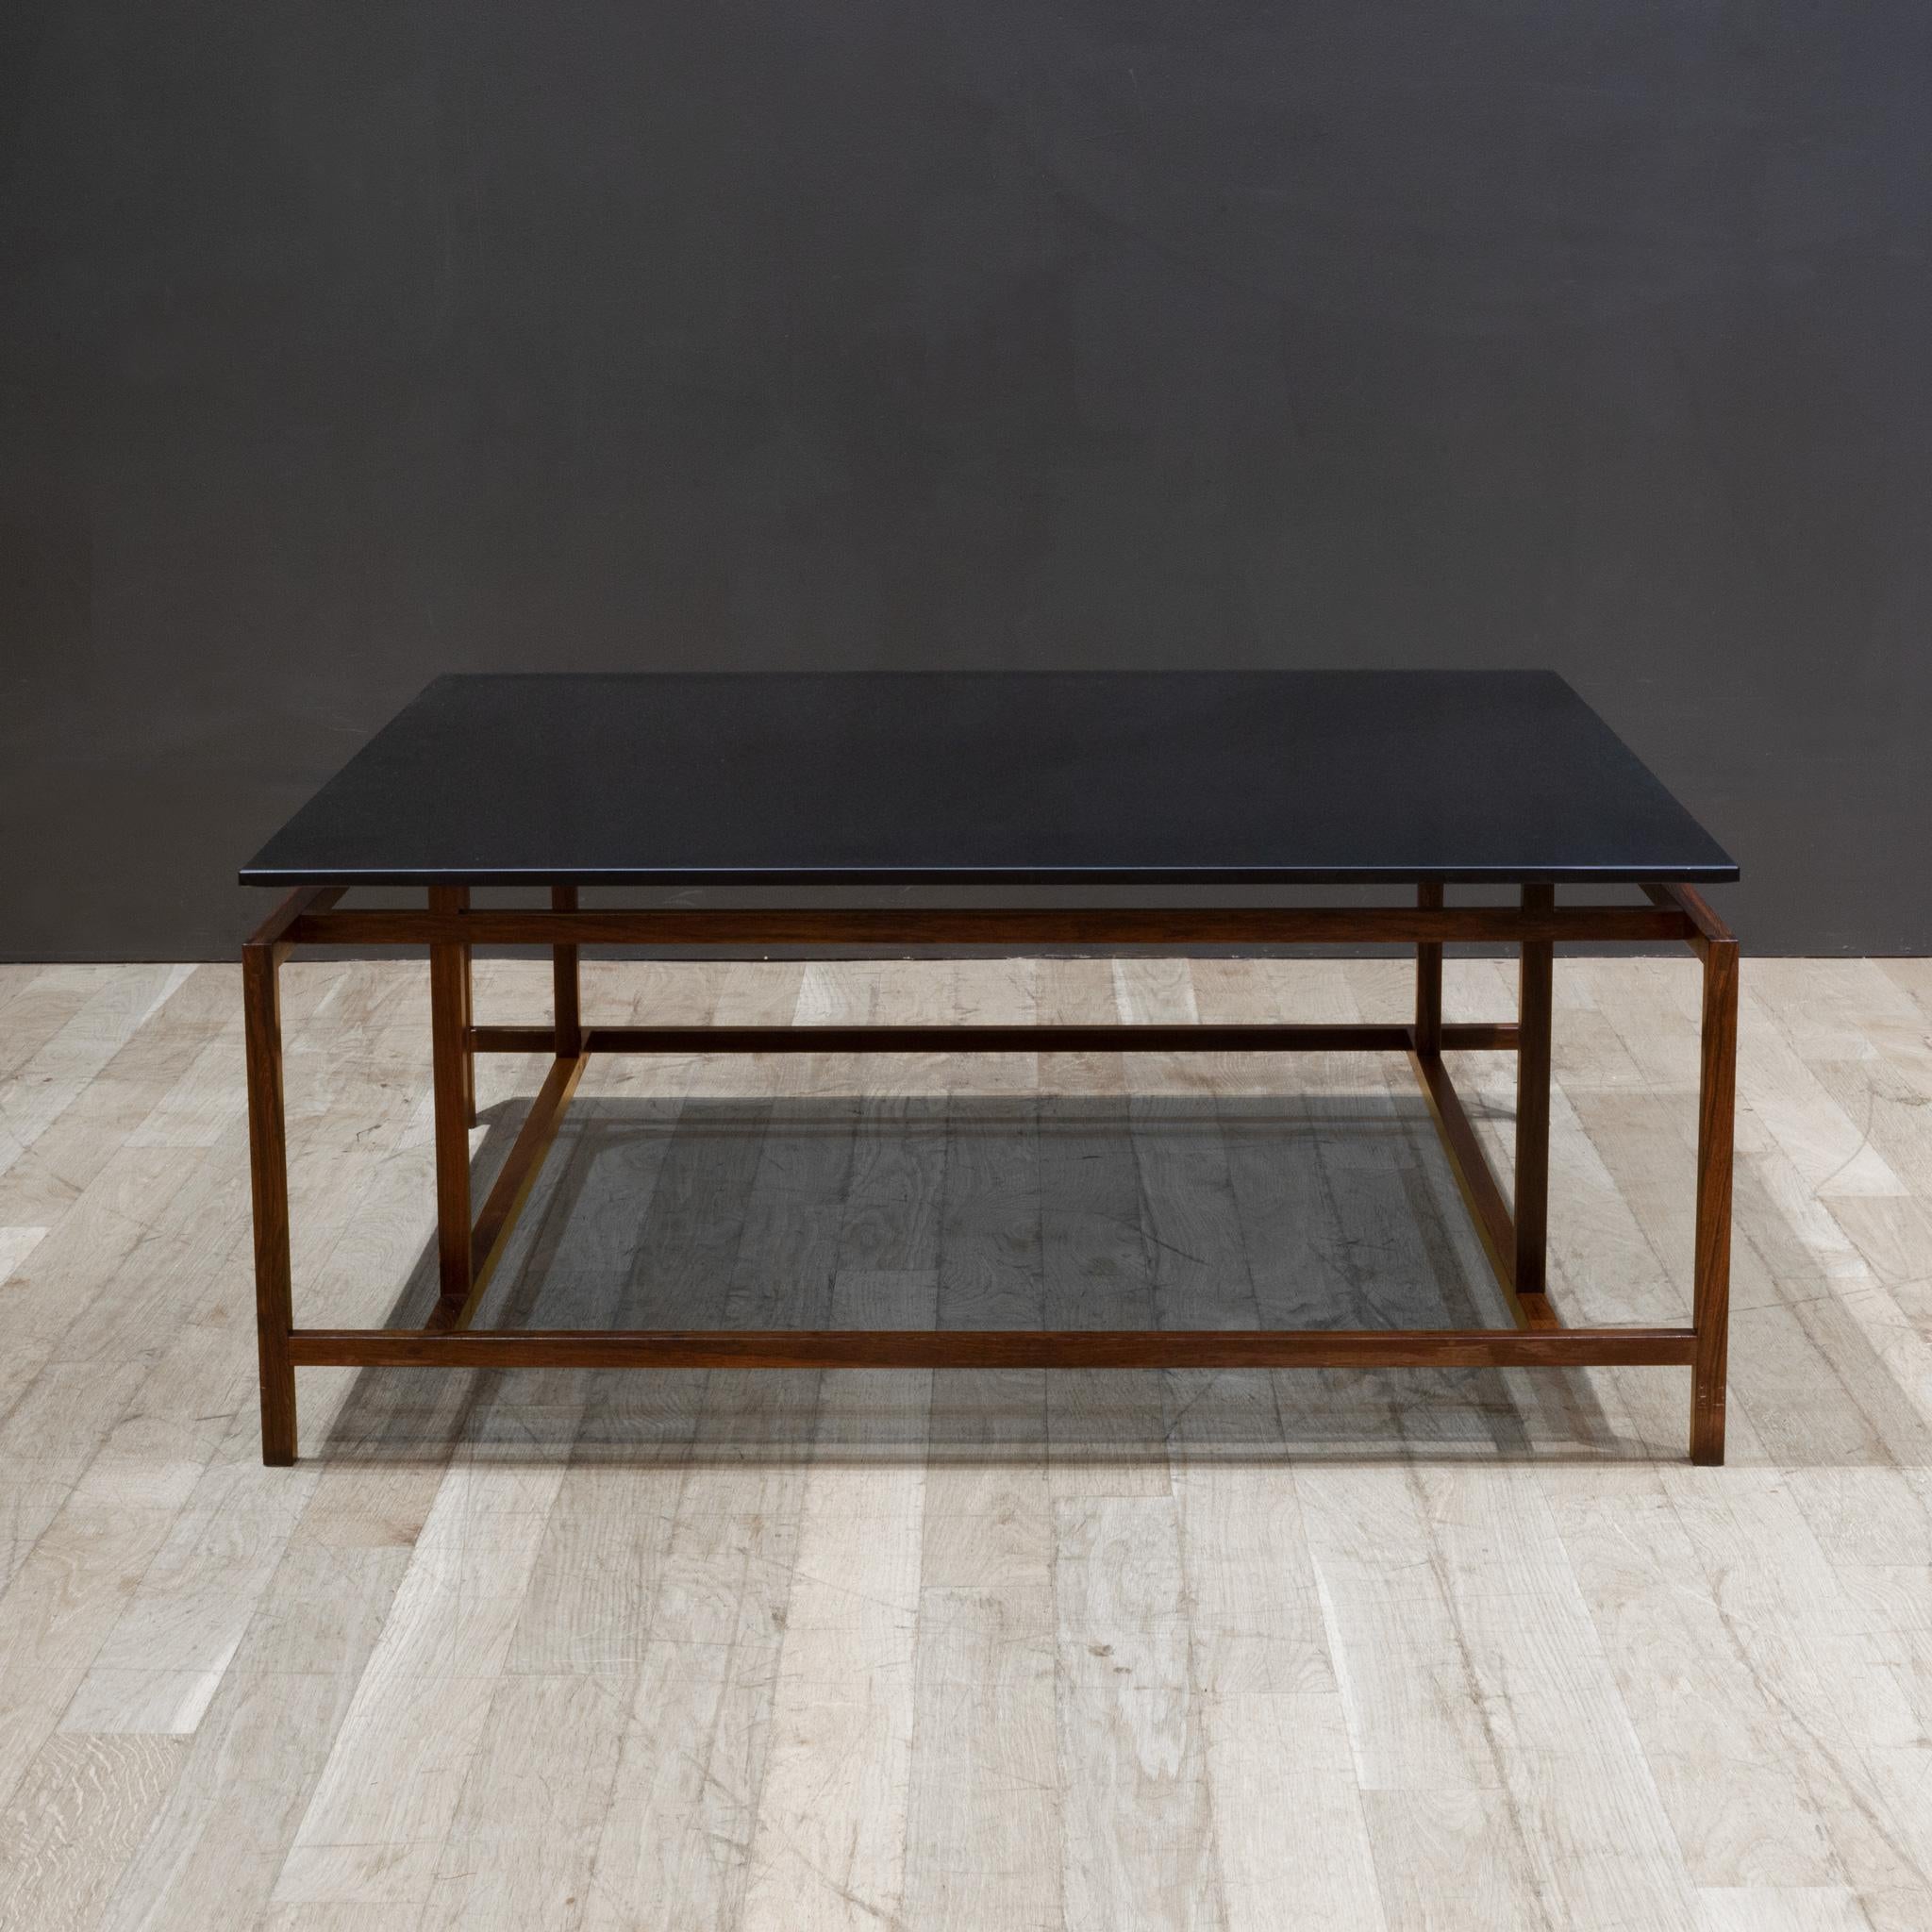 20th Century Danish Rosewood Coffee Table by Henning Norgaard for Komfort c.1960 For Sale